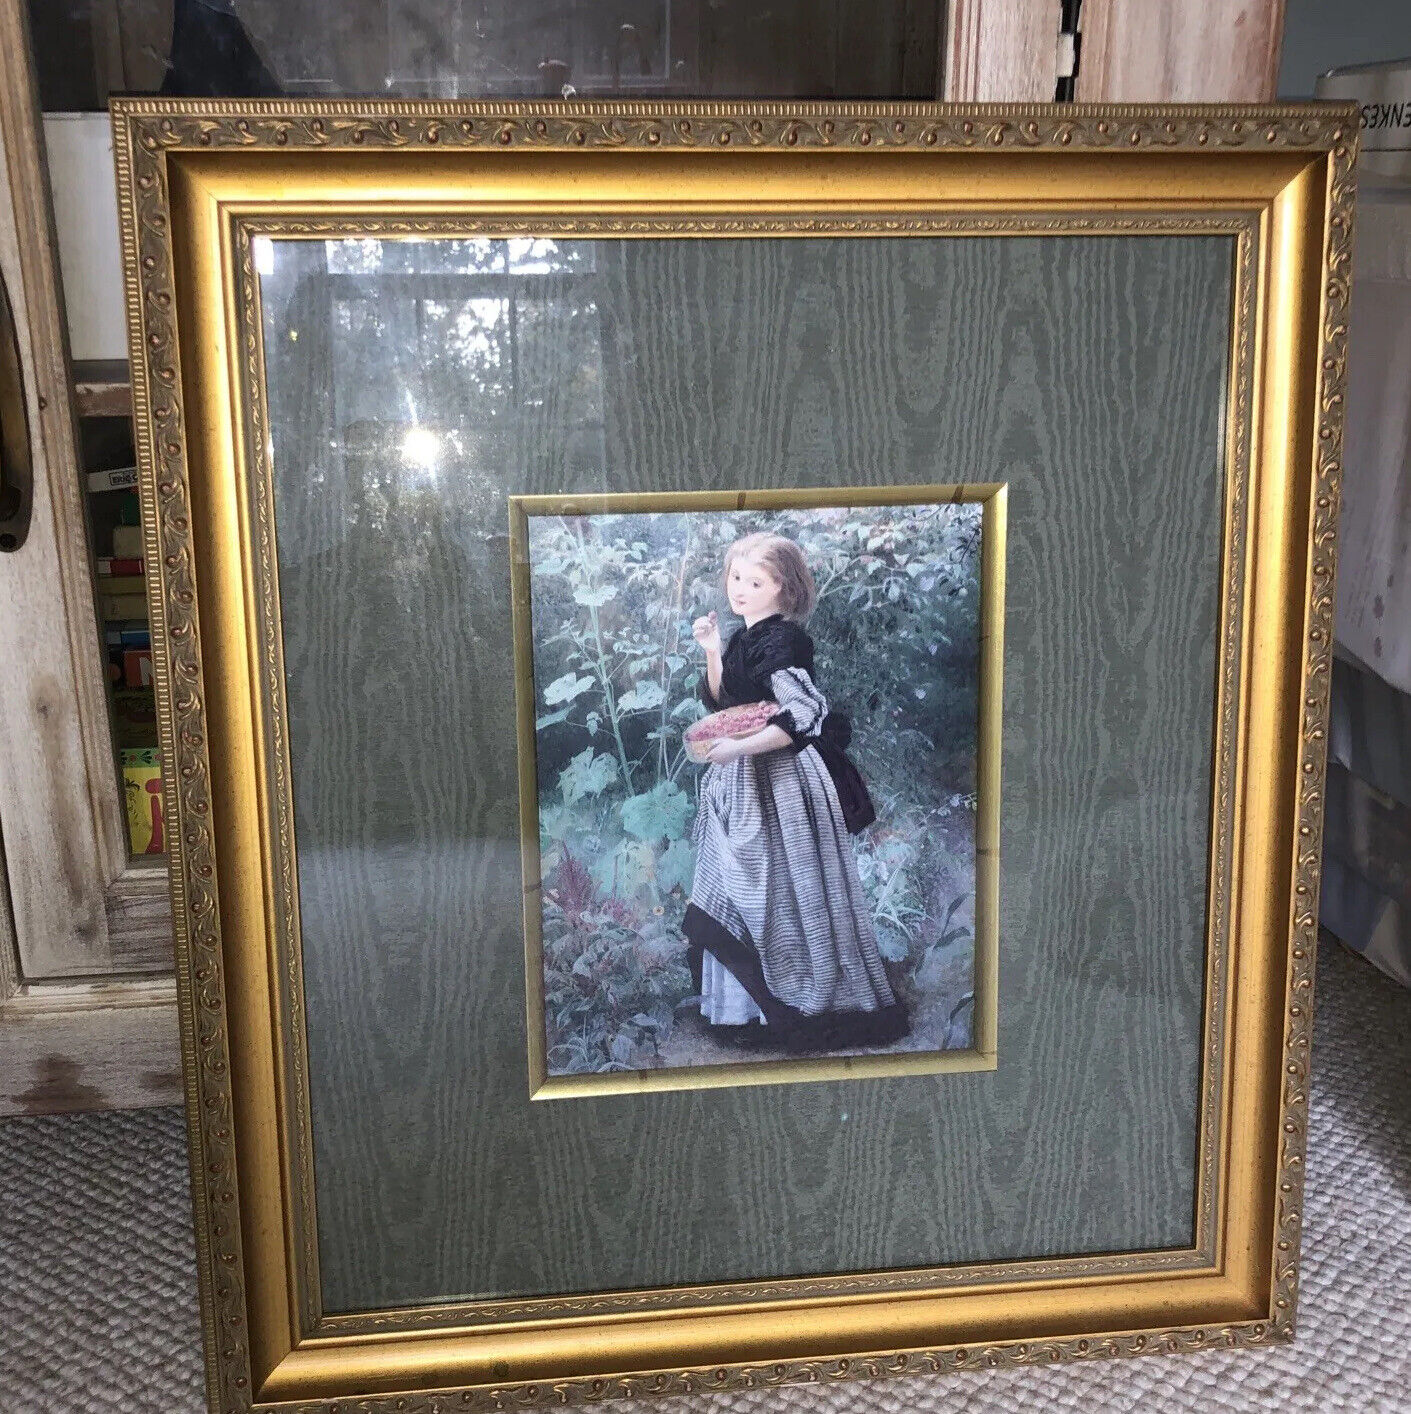 Gorgeous Wooden Picture Frame 19.5” X 22” Gold Tone Excellent Condition ￼